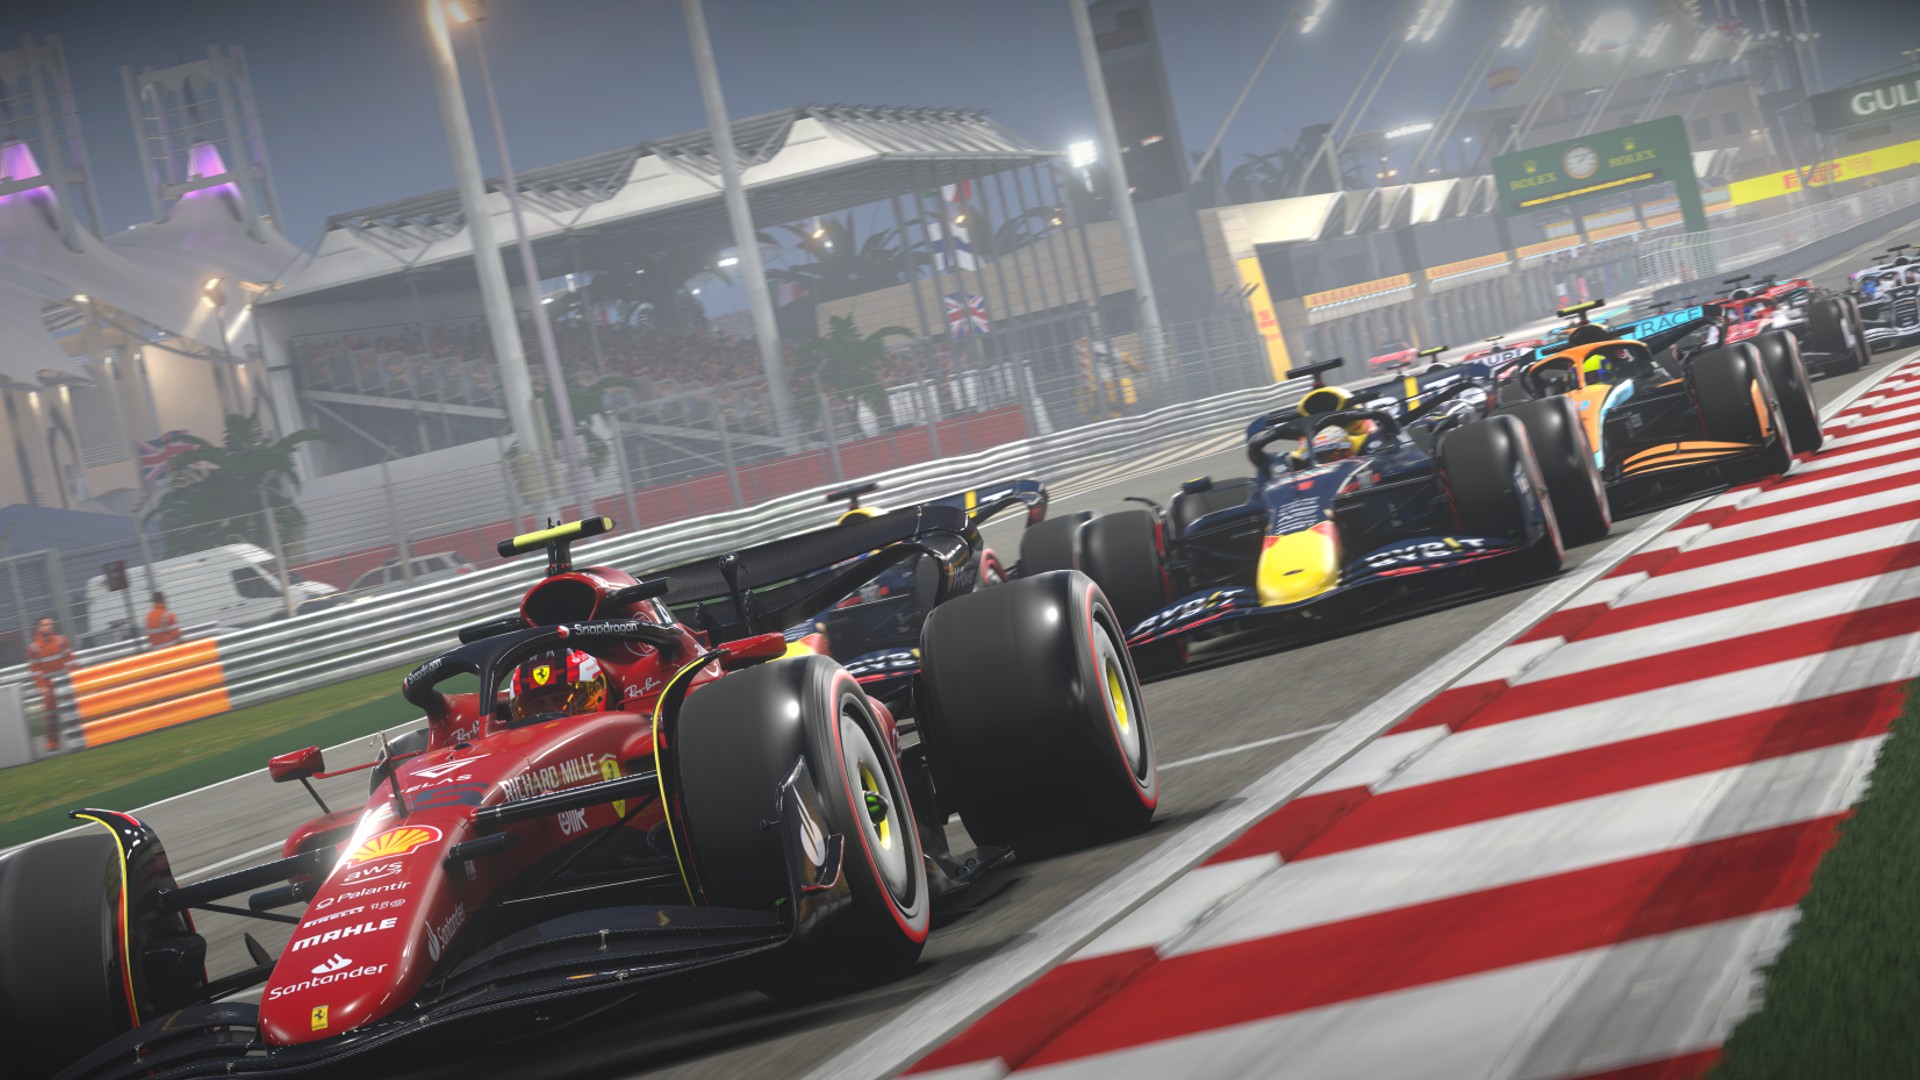 F1 22 better lap times on bahrain : r/F1Game